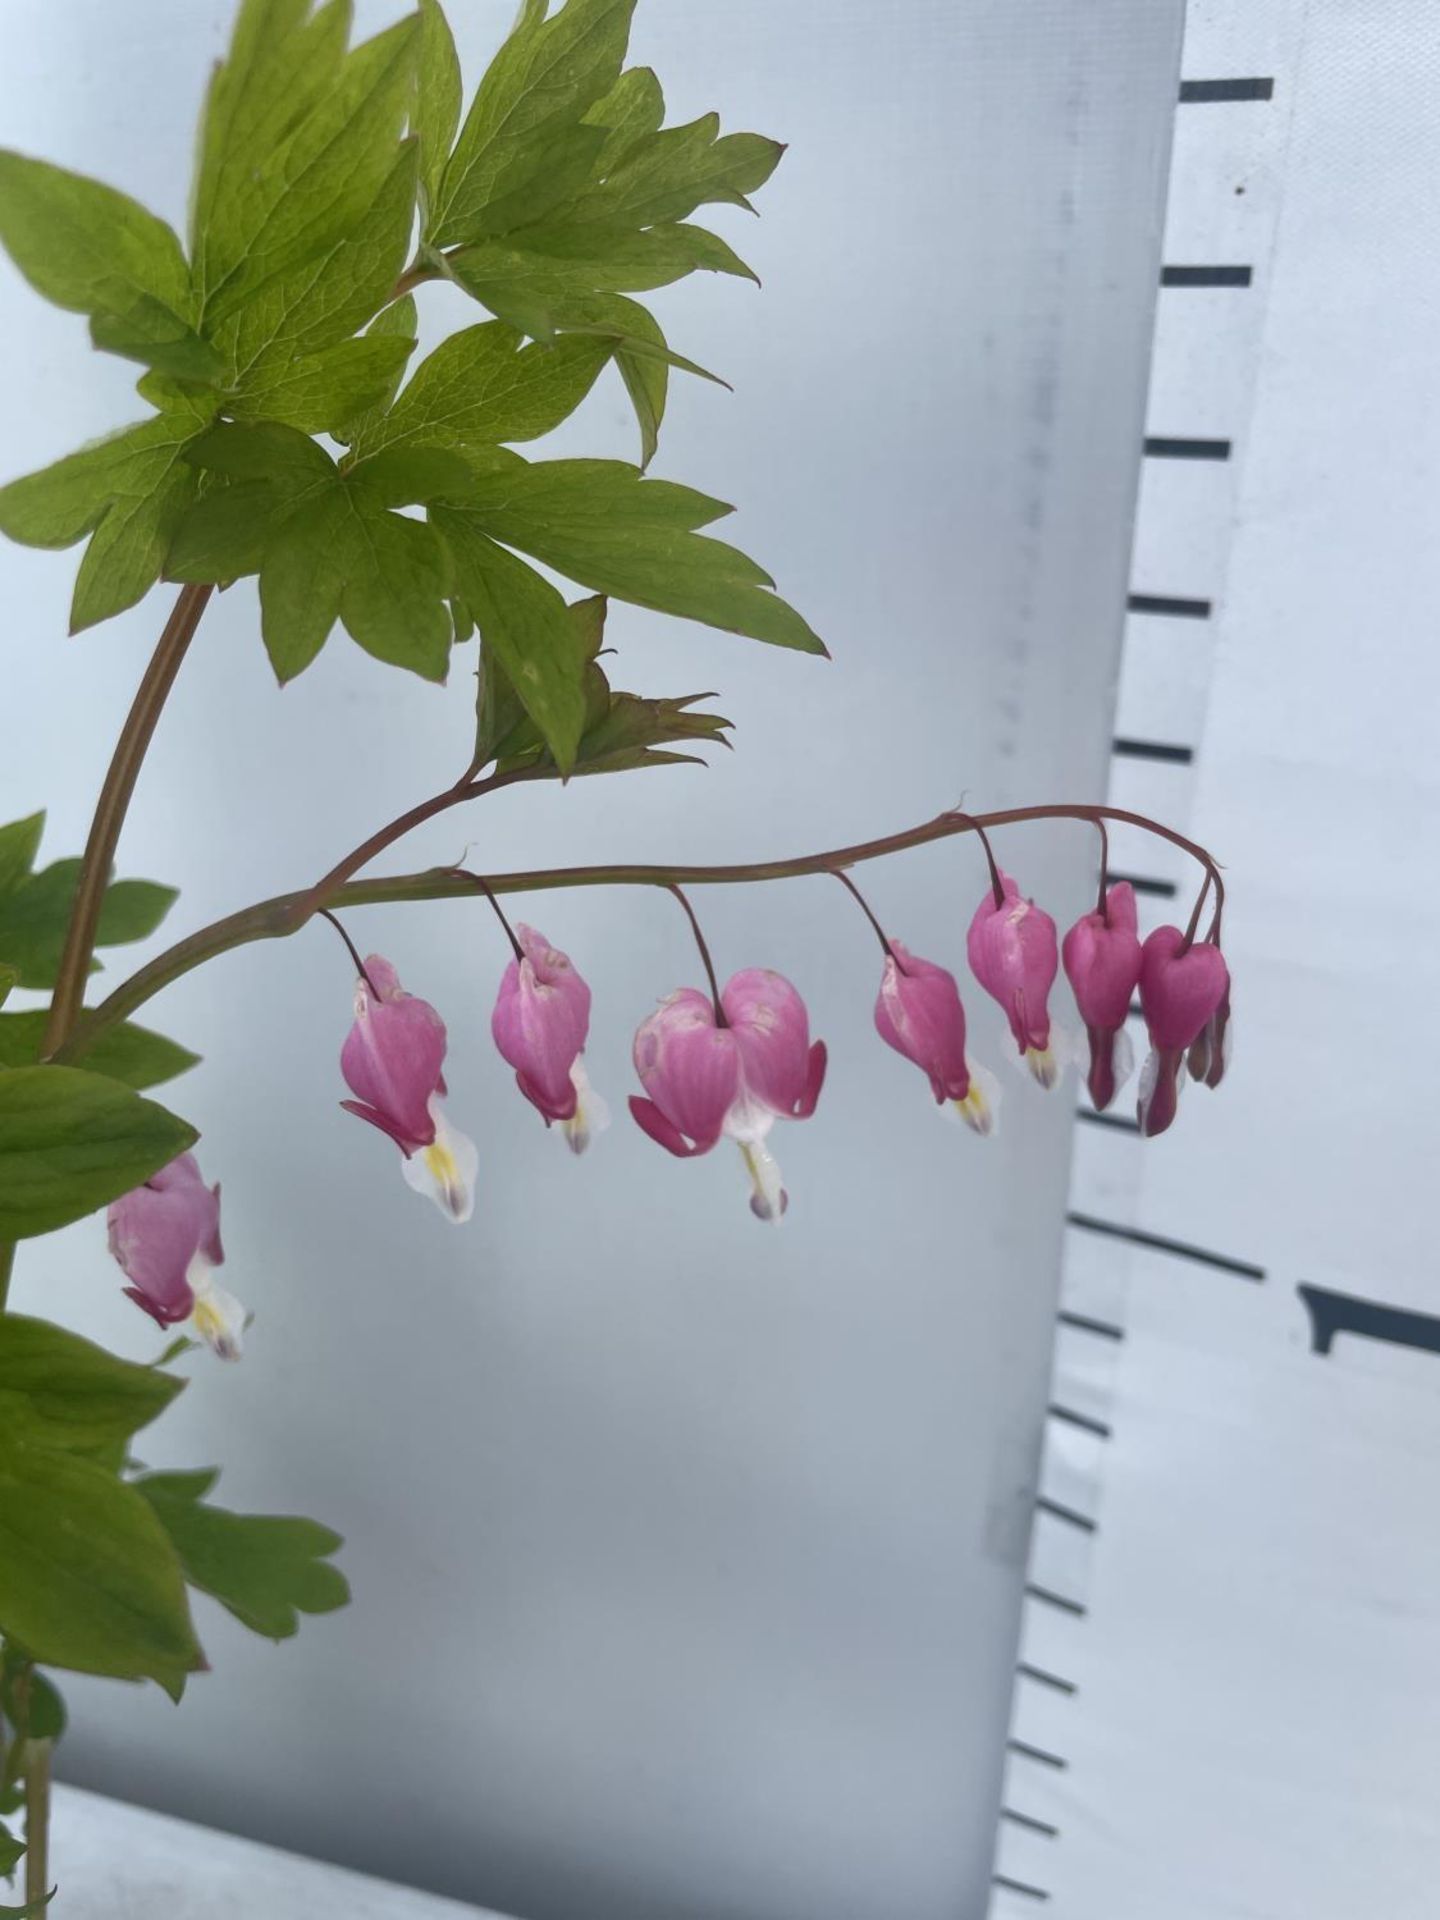 SIX DICENTRA SPECTABILIS BLEEDING HEART 50CM TALL IN 2 LTR POTS TO BE SOLD FOR THE SIX PLUS VAT - Image 5 of 9